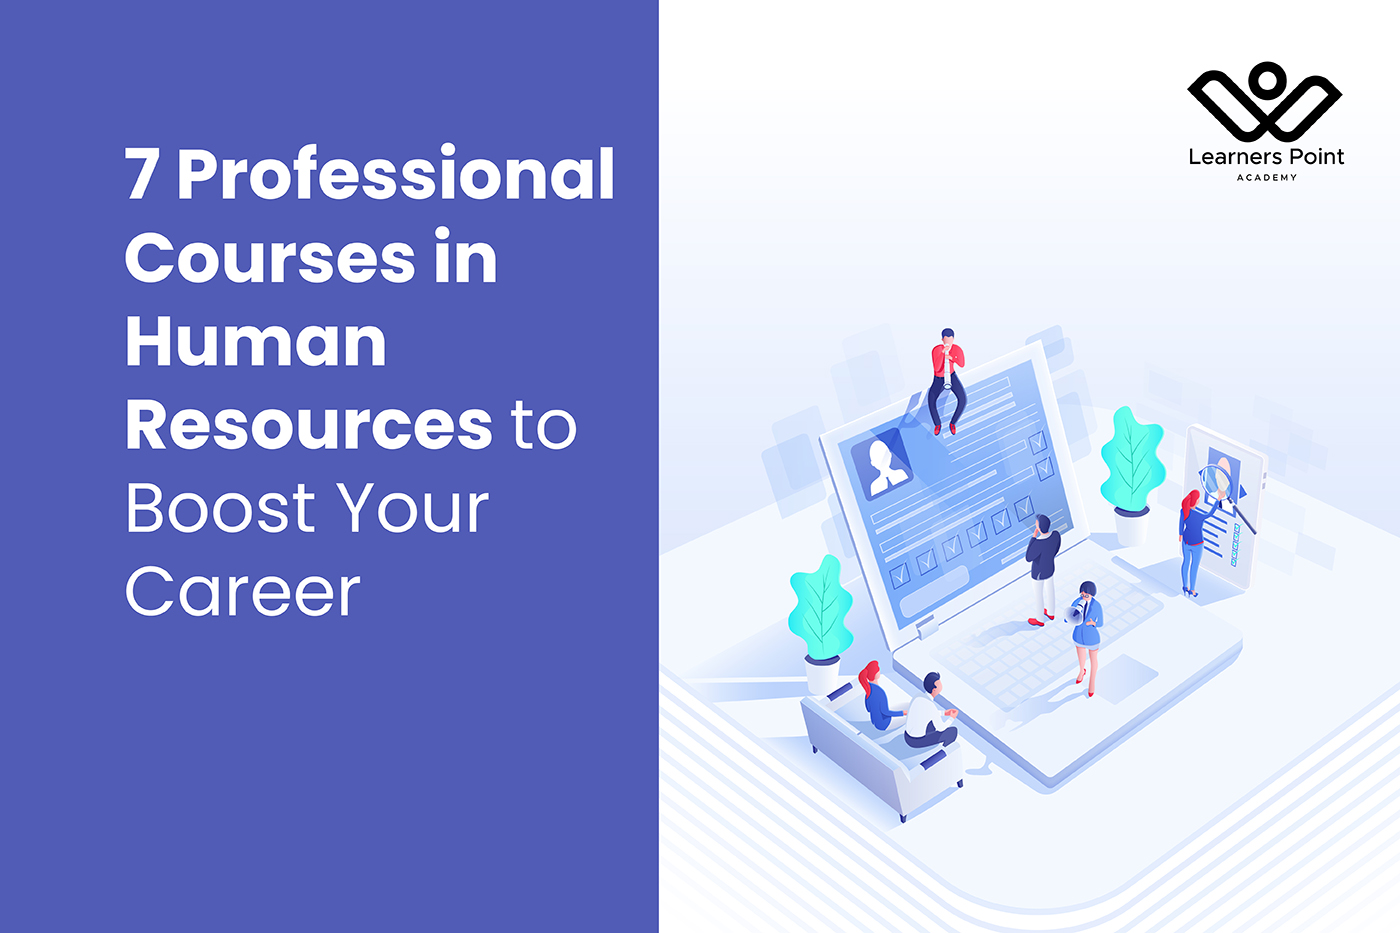 7 Professional Courses in Human Resources to Boost Your Career